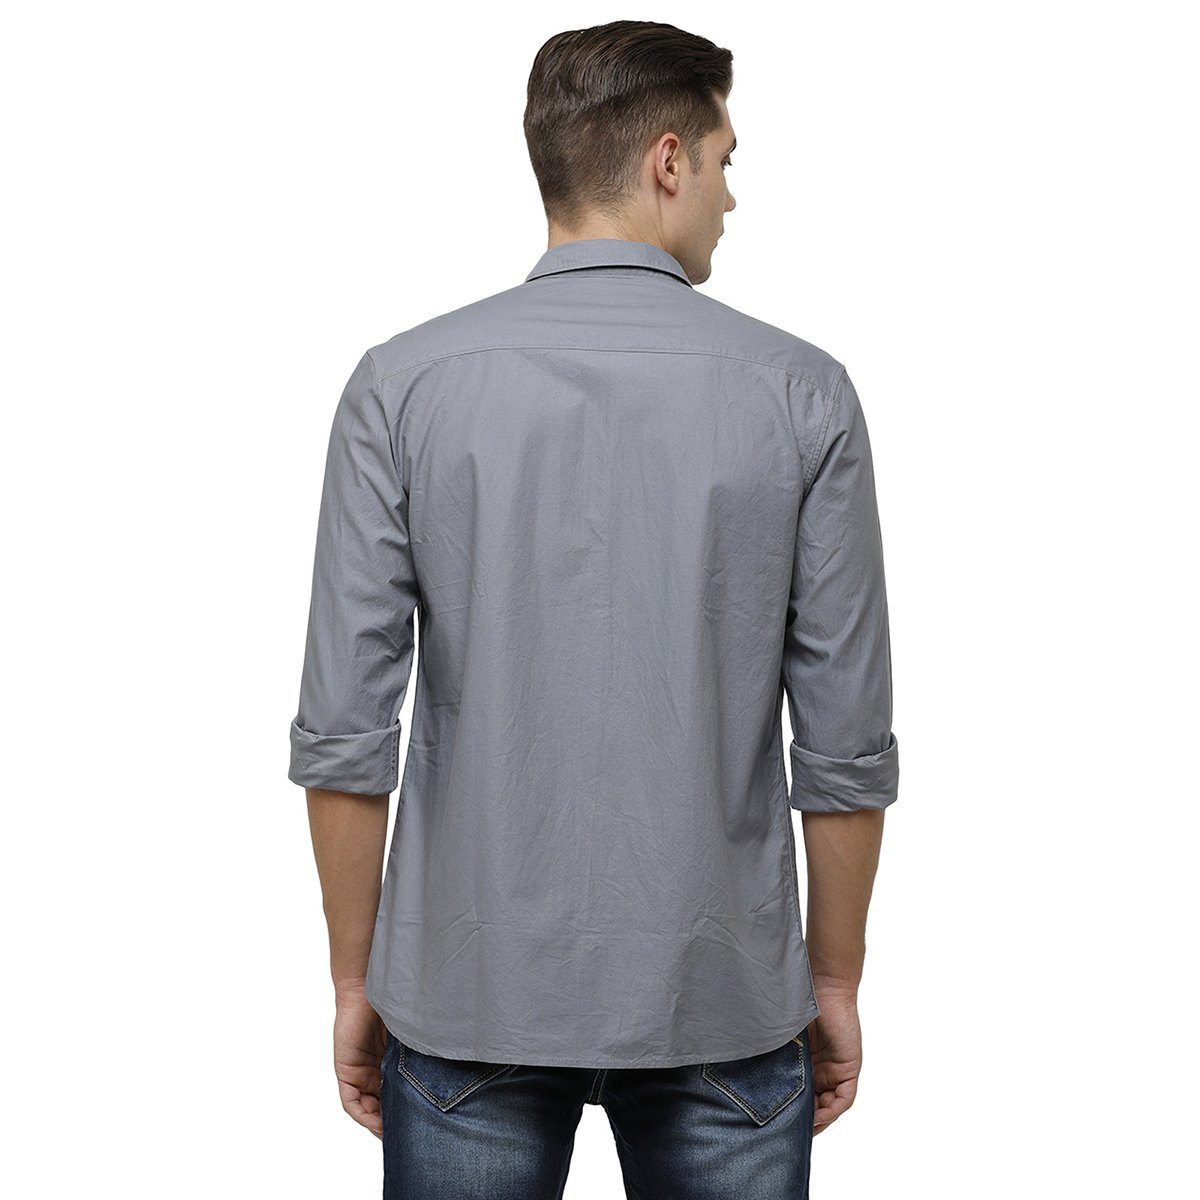 Classic Polo Mens Collar Neck Full Sleeve Grey Smart Fit 100% Cotton Woven Shirt SM1-68 C-FS-SLD-SF Shirts Classic Polo 